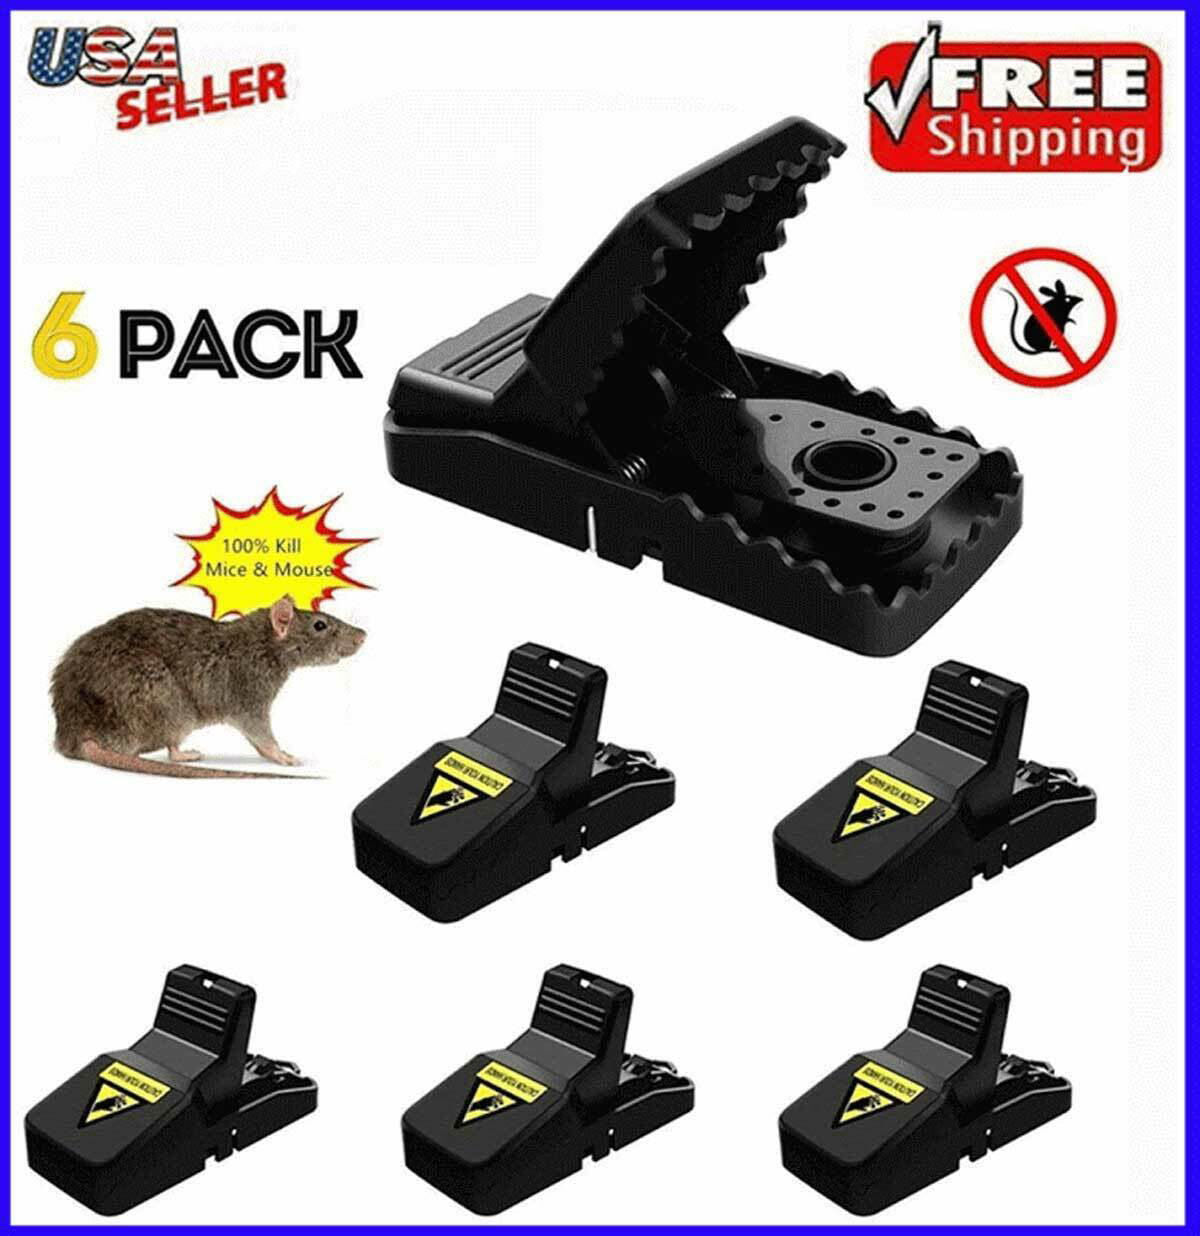 Auto Mouse Traps Household Pest Mice Control Rodent Bait Killer Stainless Steel 